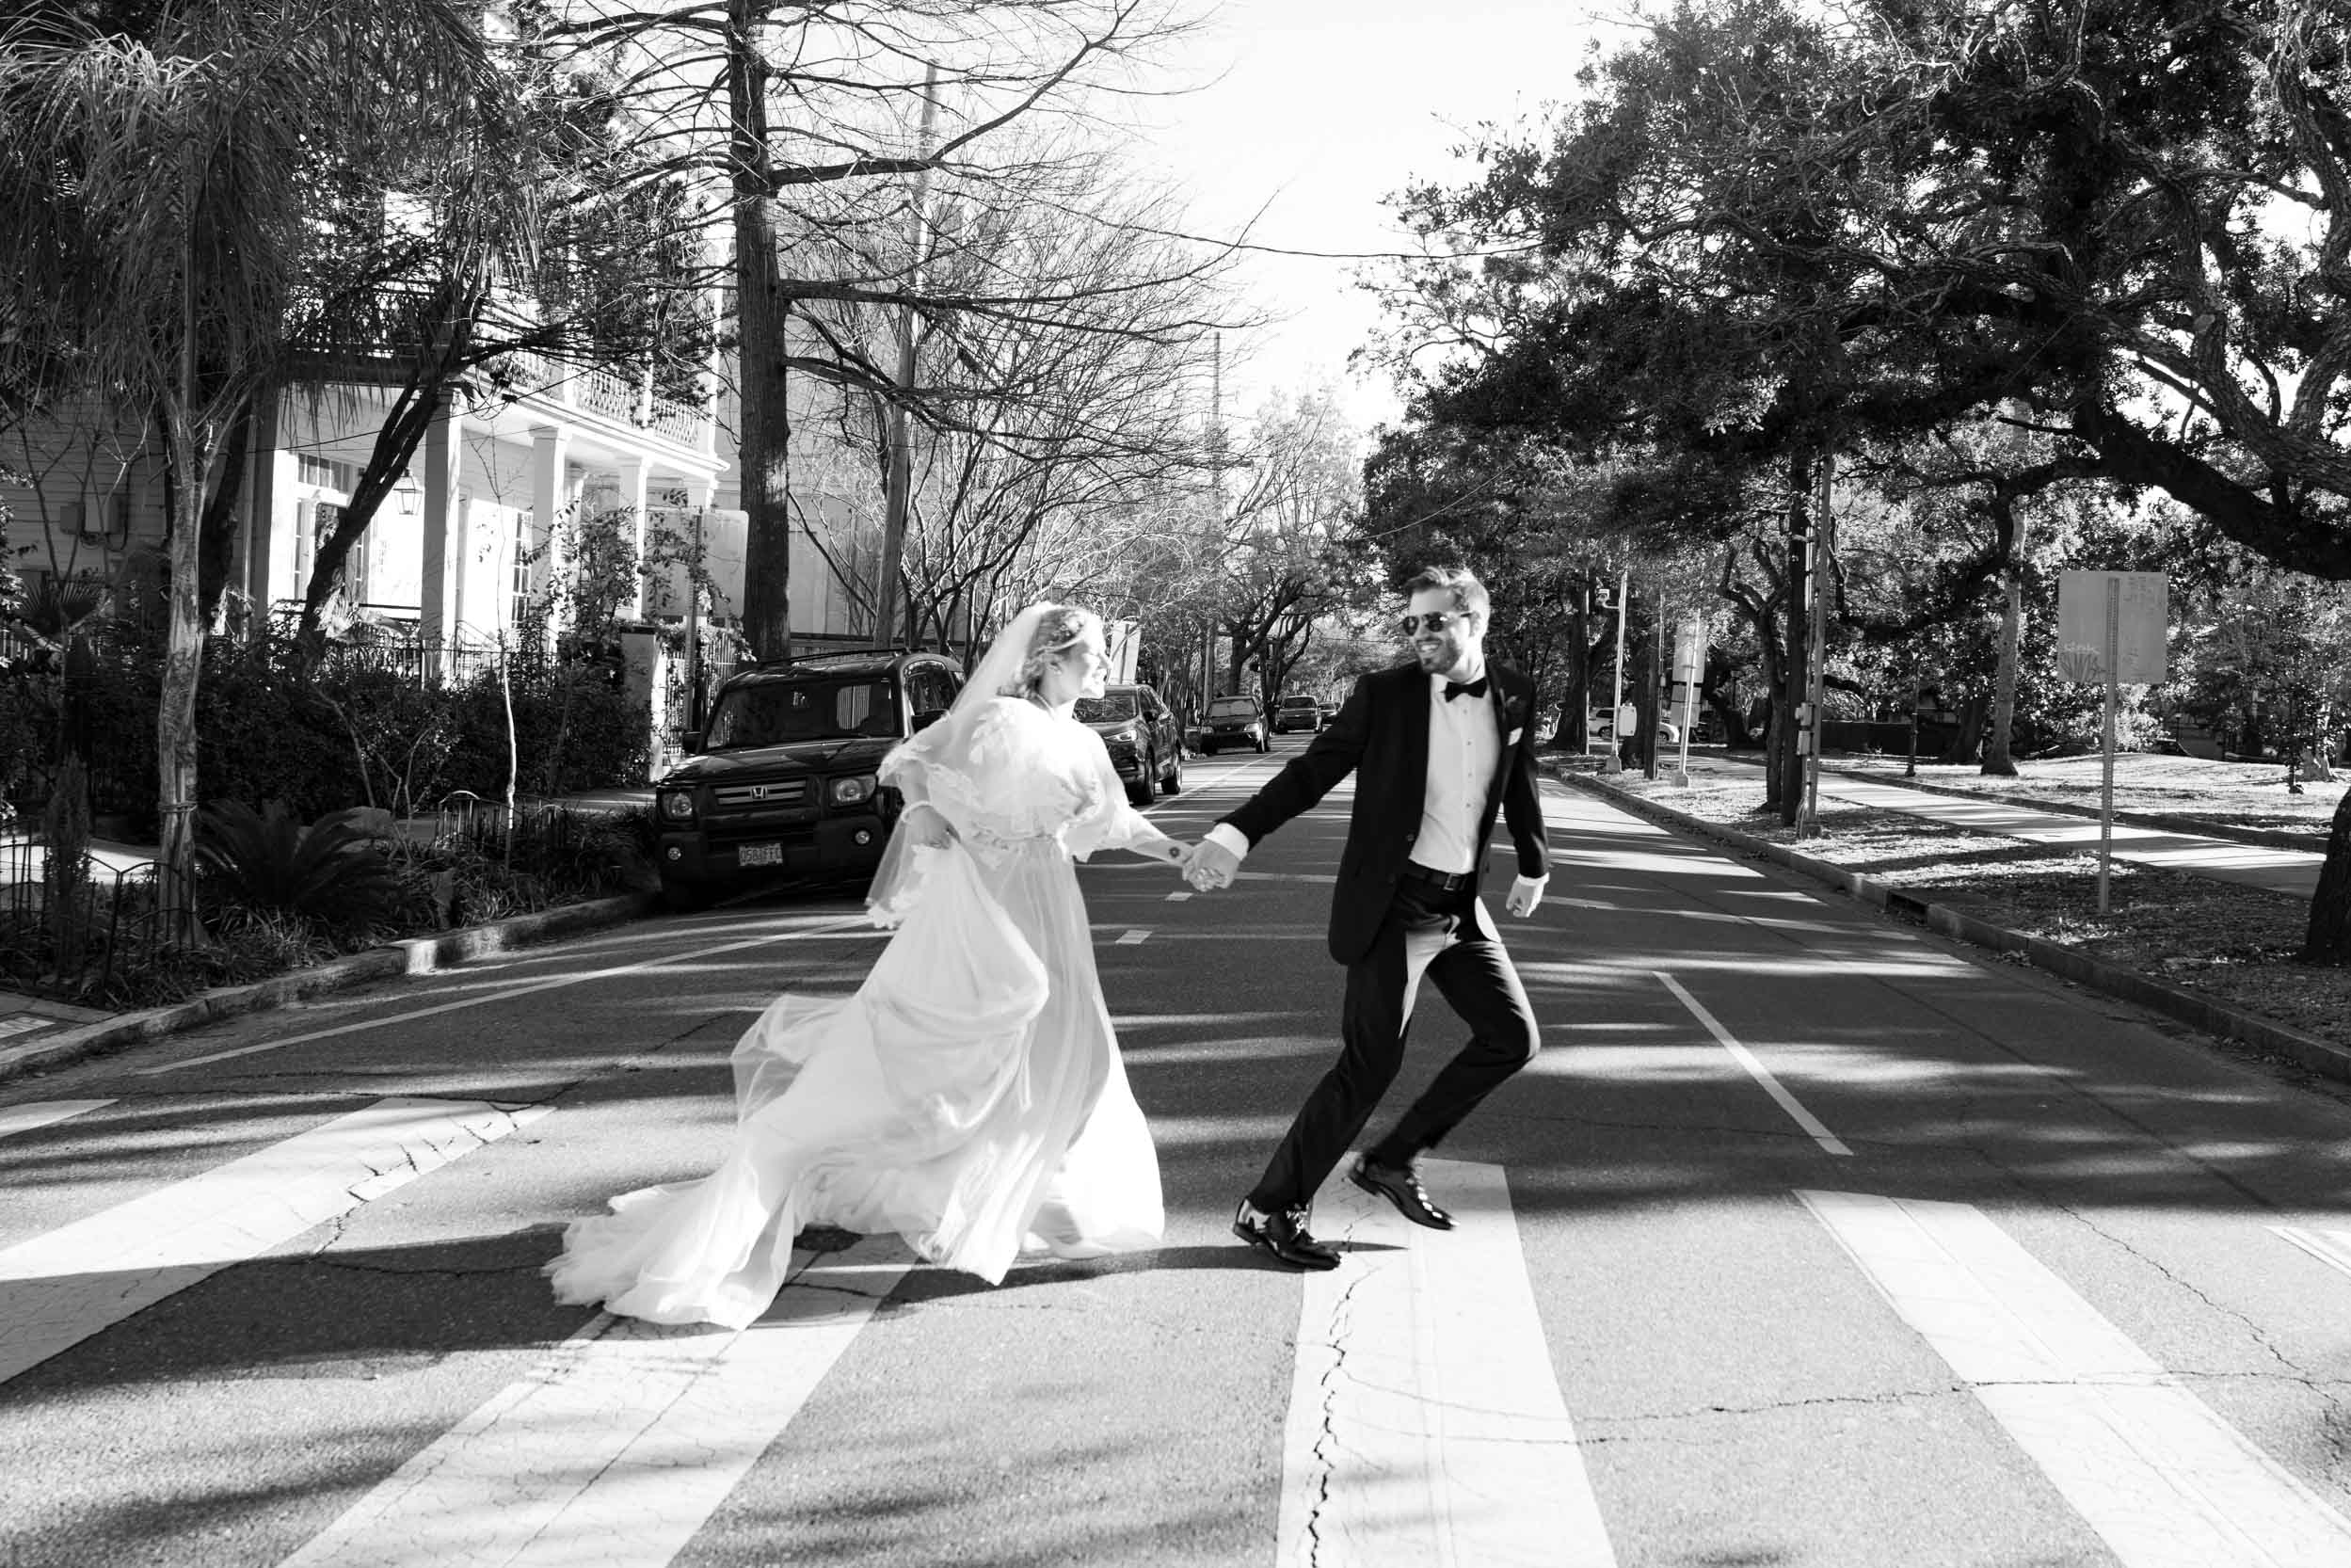 bride and groom running across street in New Orleans on wedding day, inspired by The Beatles Abby Road